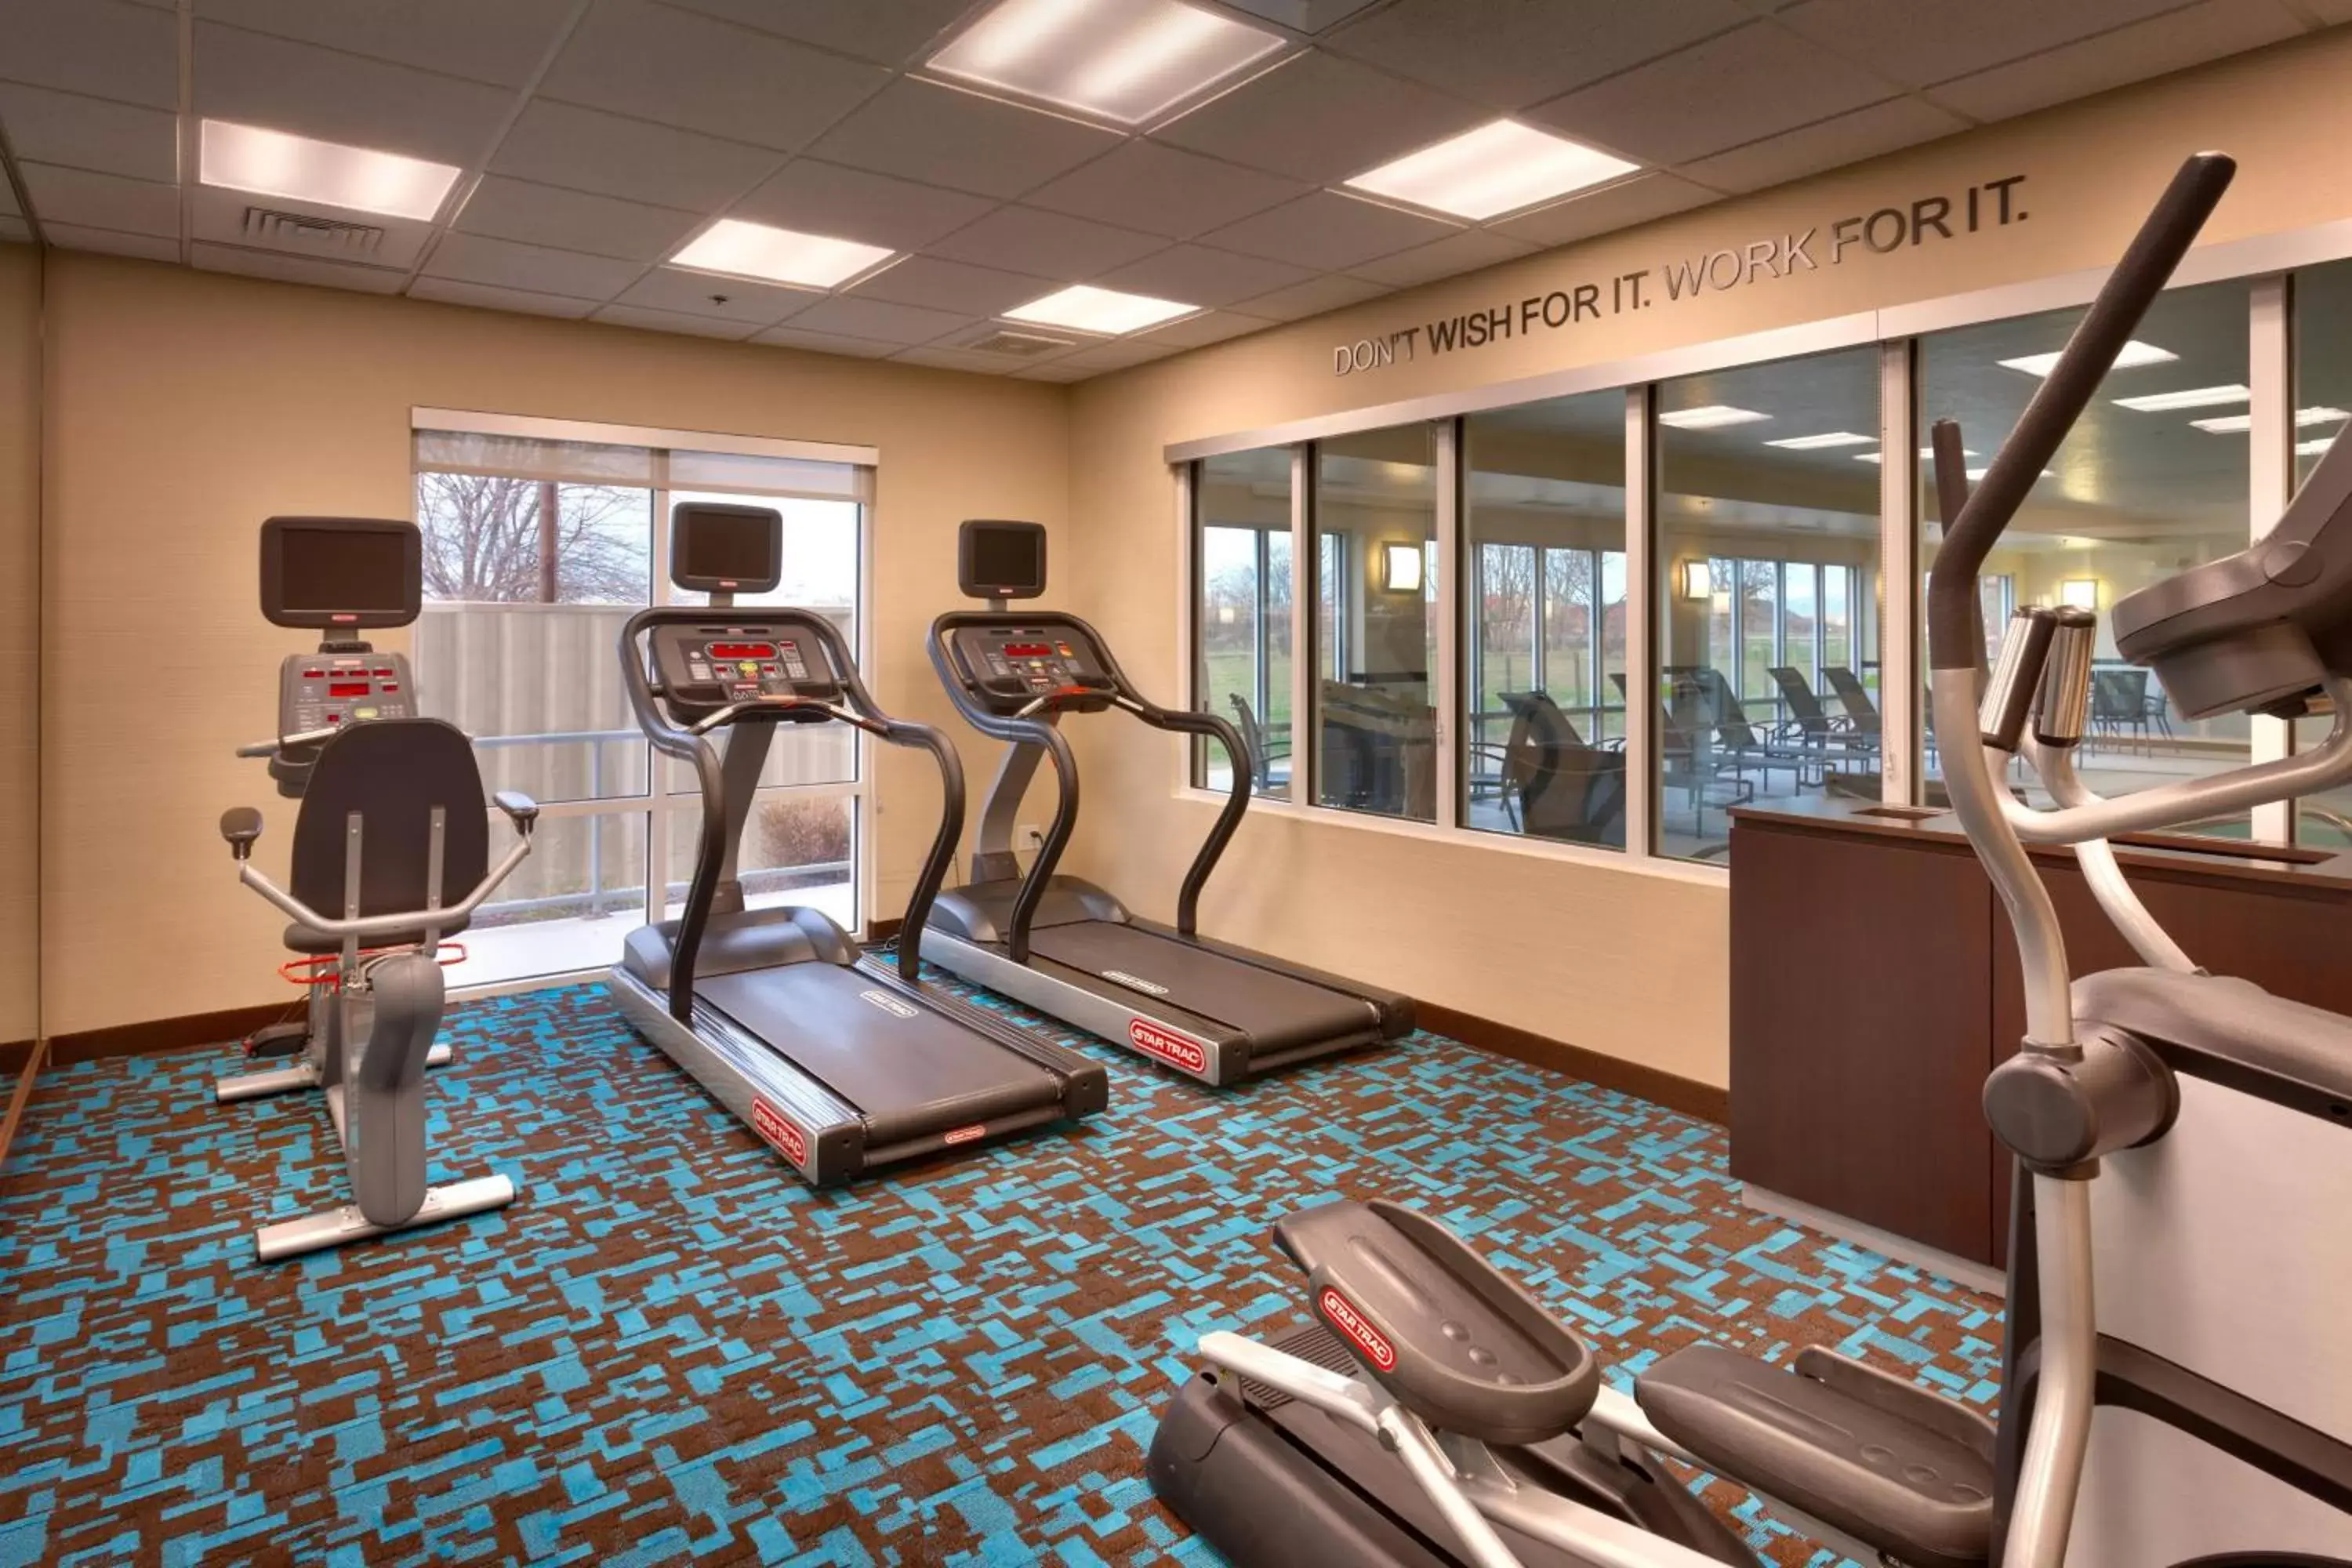 Fitness centre/facilities, Fitness Center/Facilities in Fairfield Inn & Suites Boise Nampa